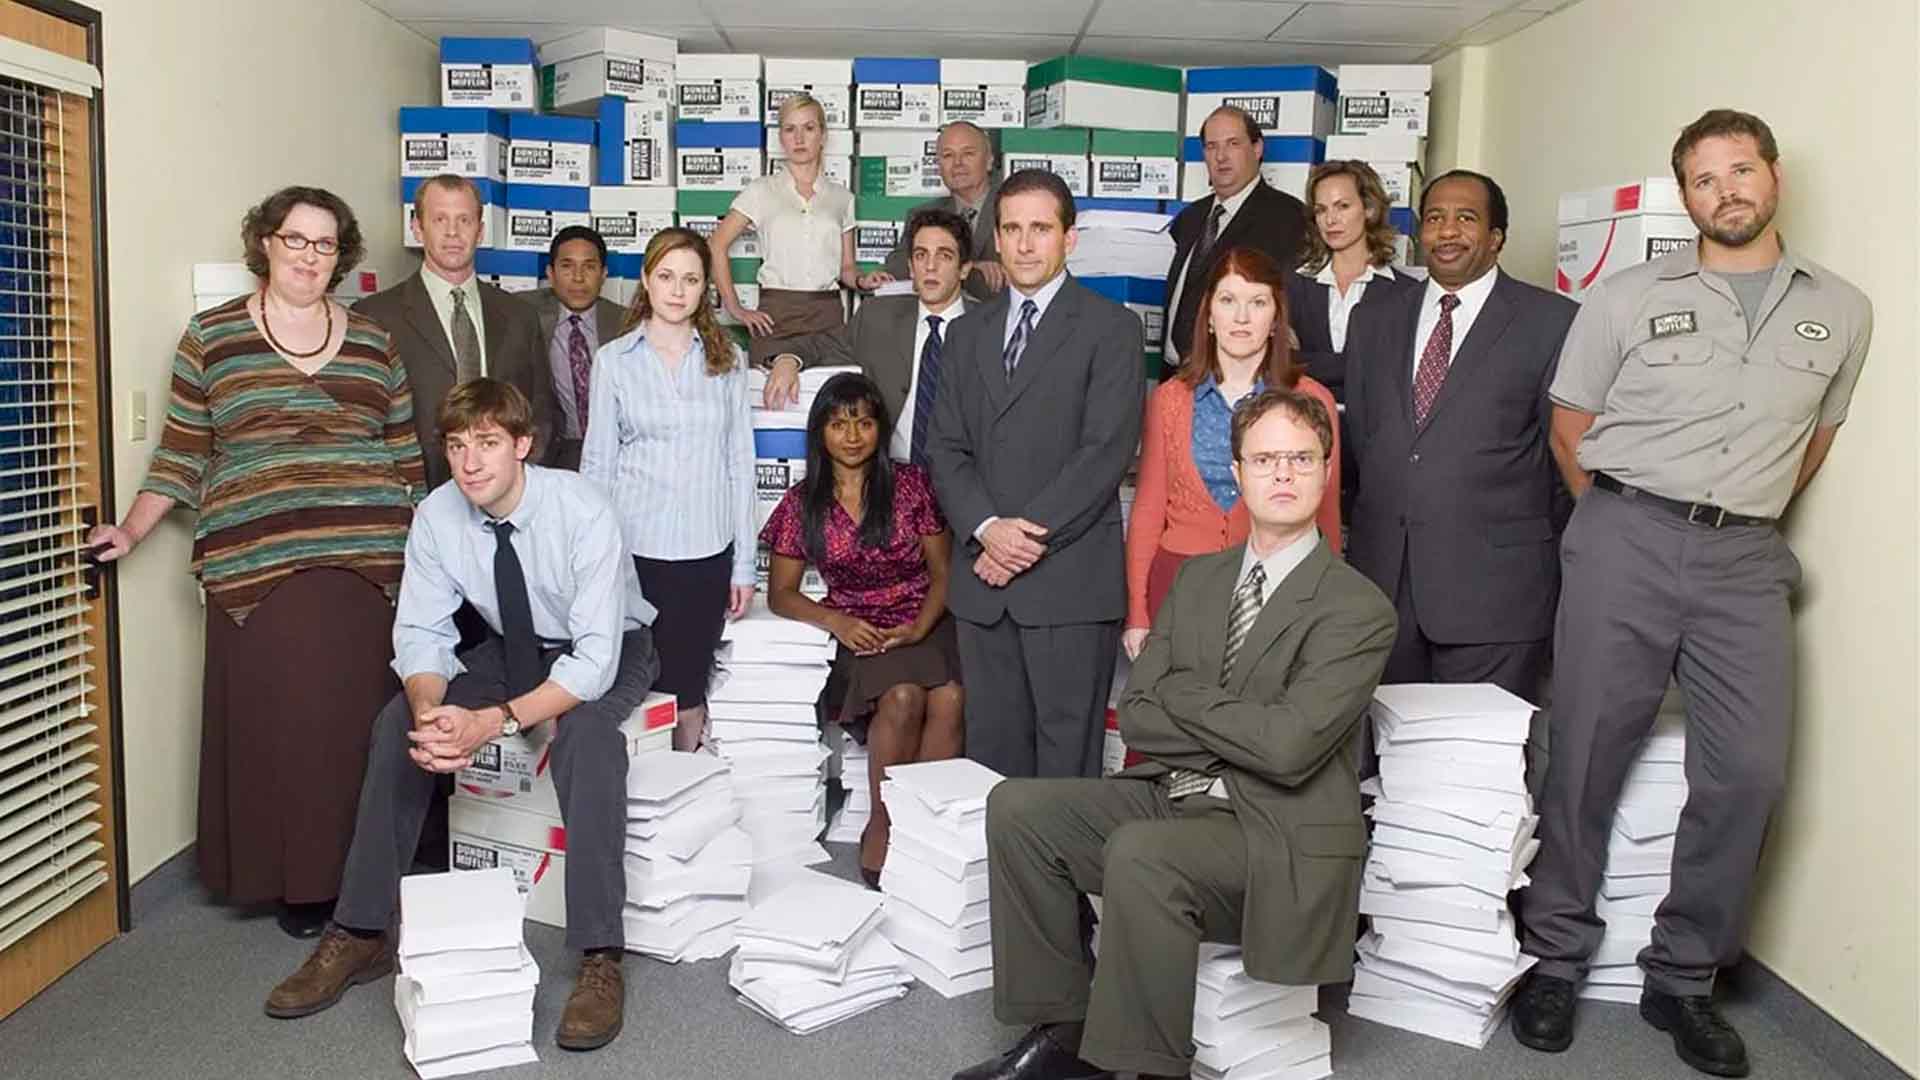 The cast of The Office around boxes of paper